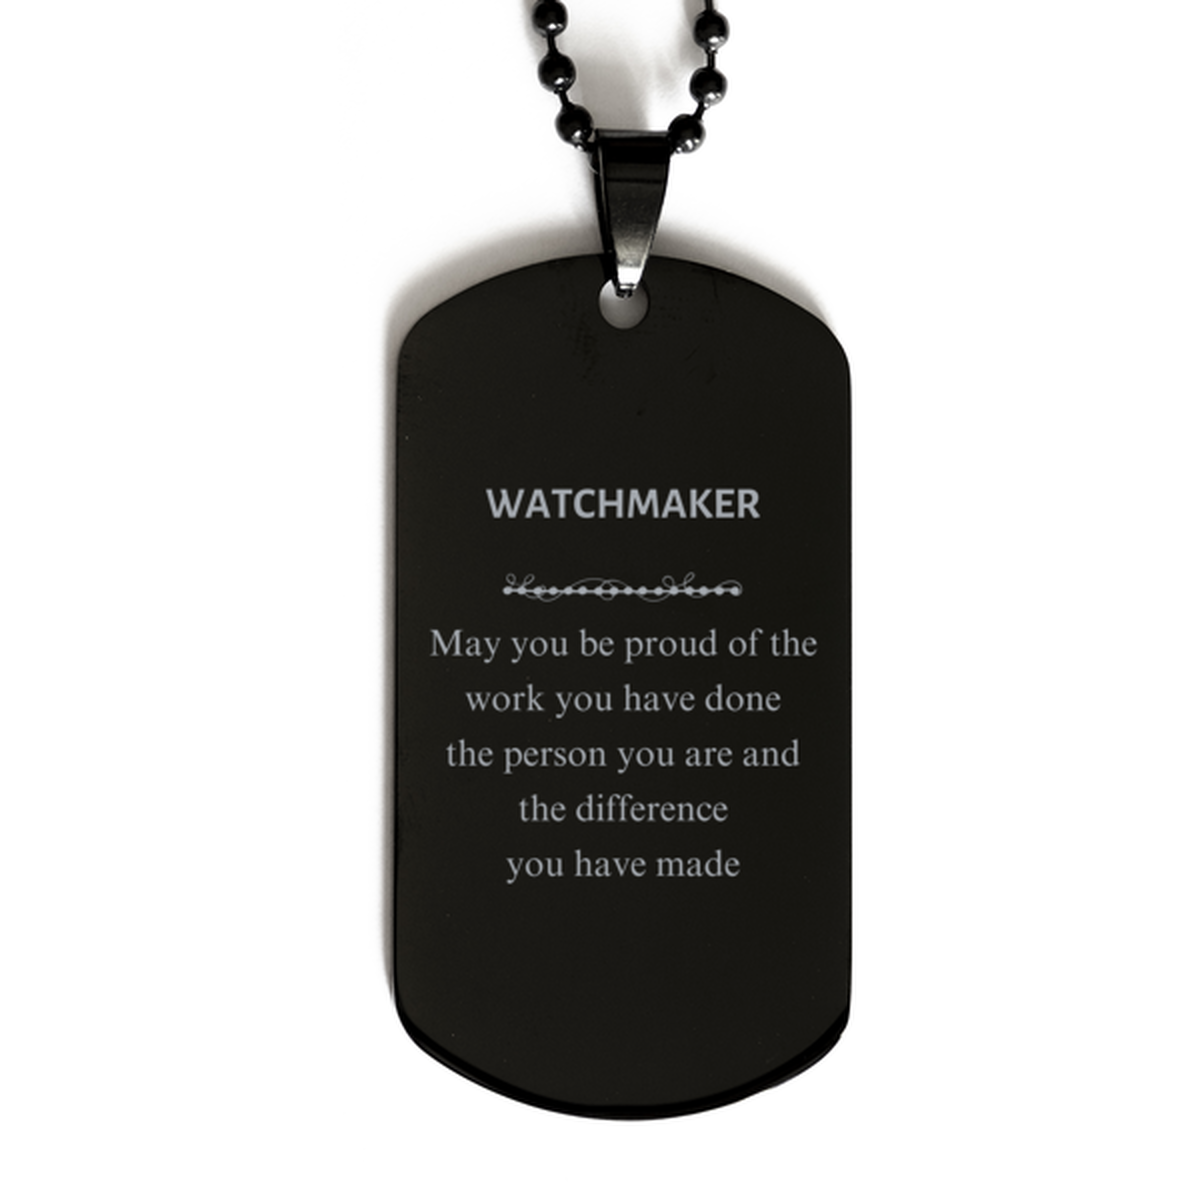 Watchmaker May you be proud of the work you have done, Retirement Watchmaker Black Dog Tag for Colleague Appreciation Gifts Amazing for Watchmaker